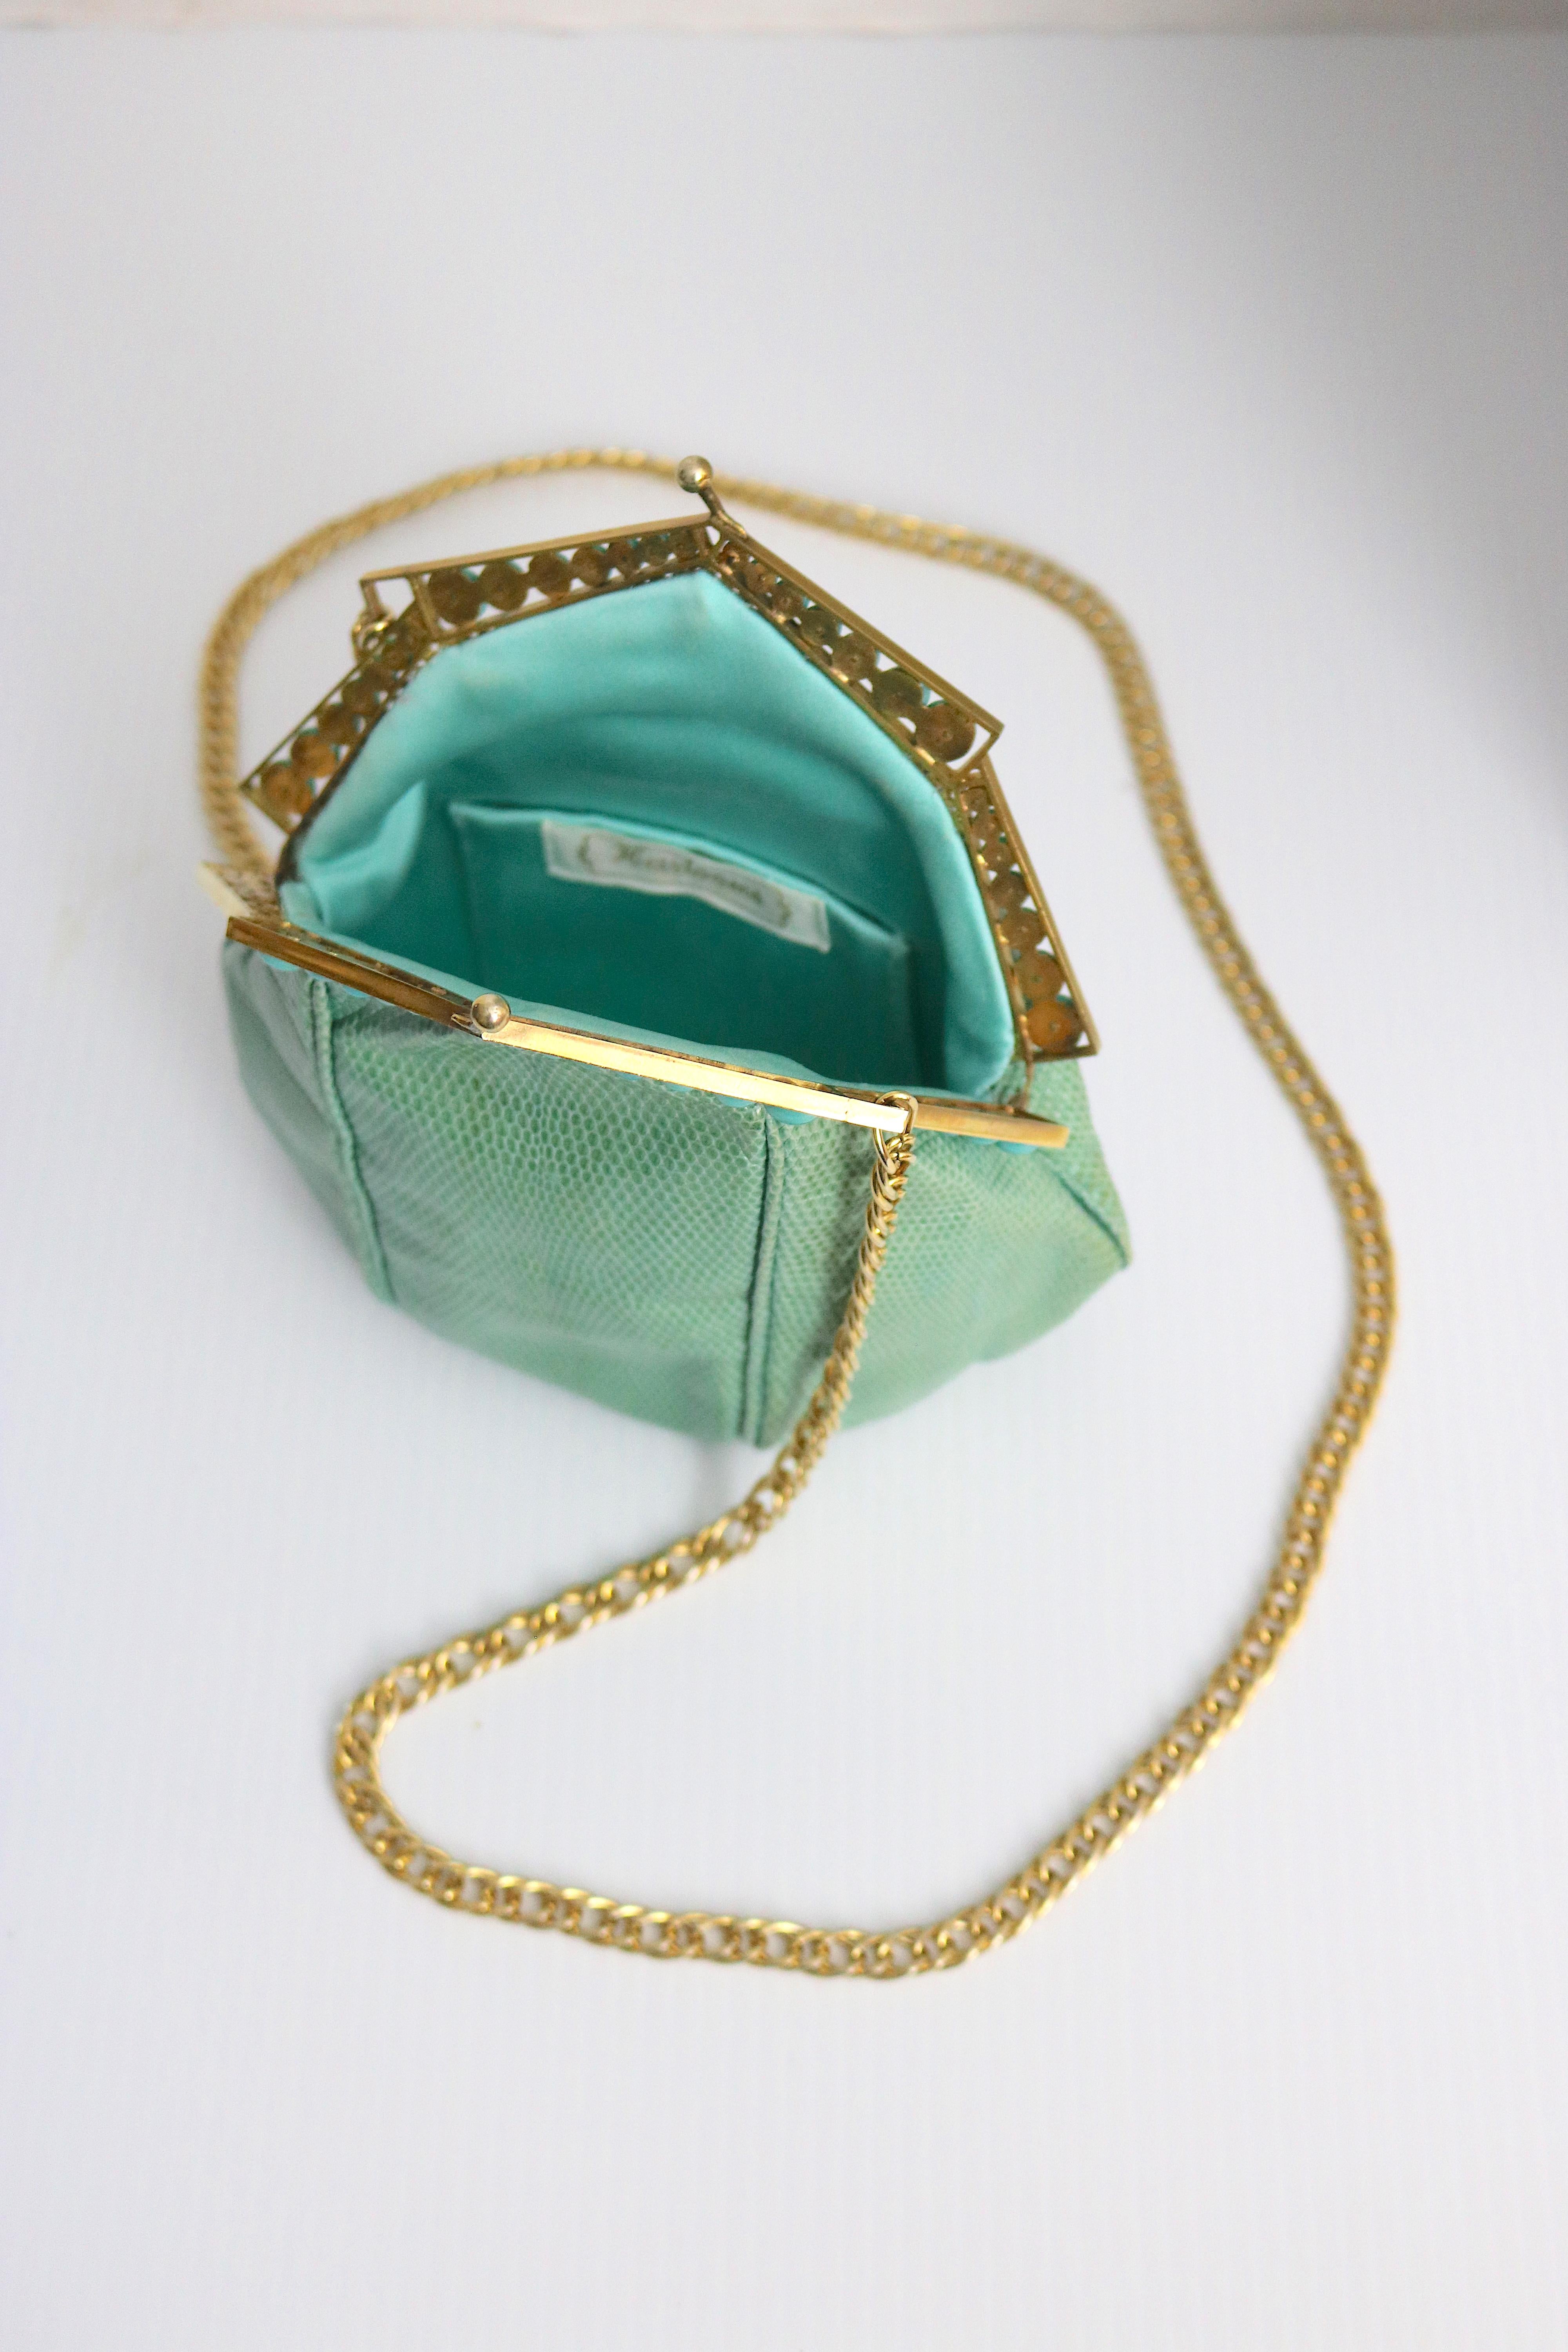 Art Deco Gold Plate c 1930 Frame Snakeskin Evening Bag Turquoise Beads For Sale 1